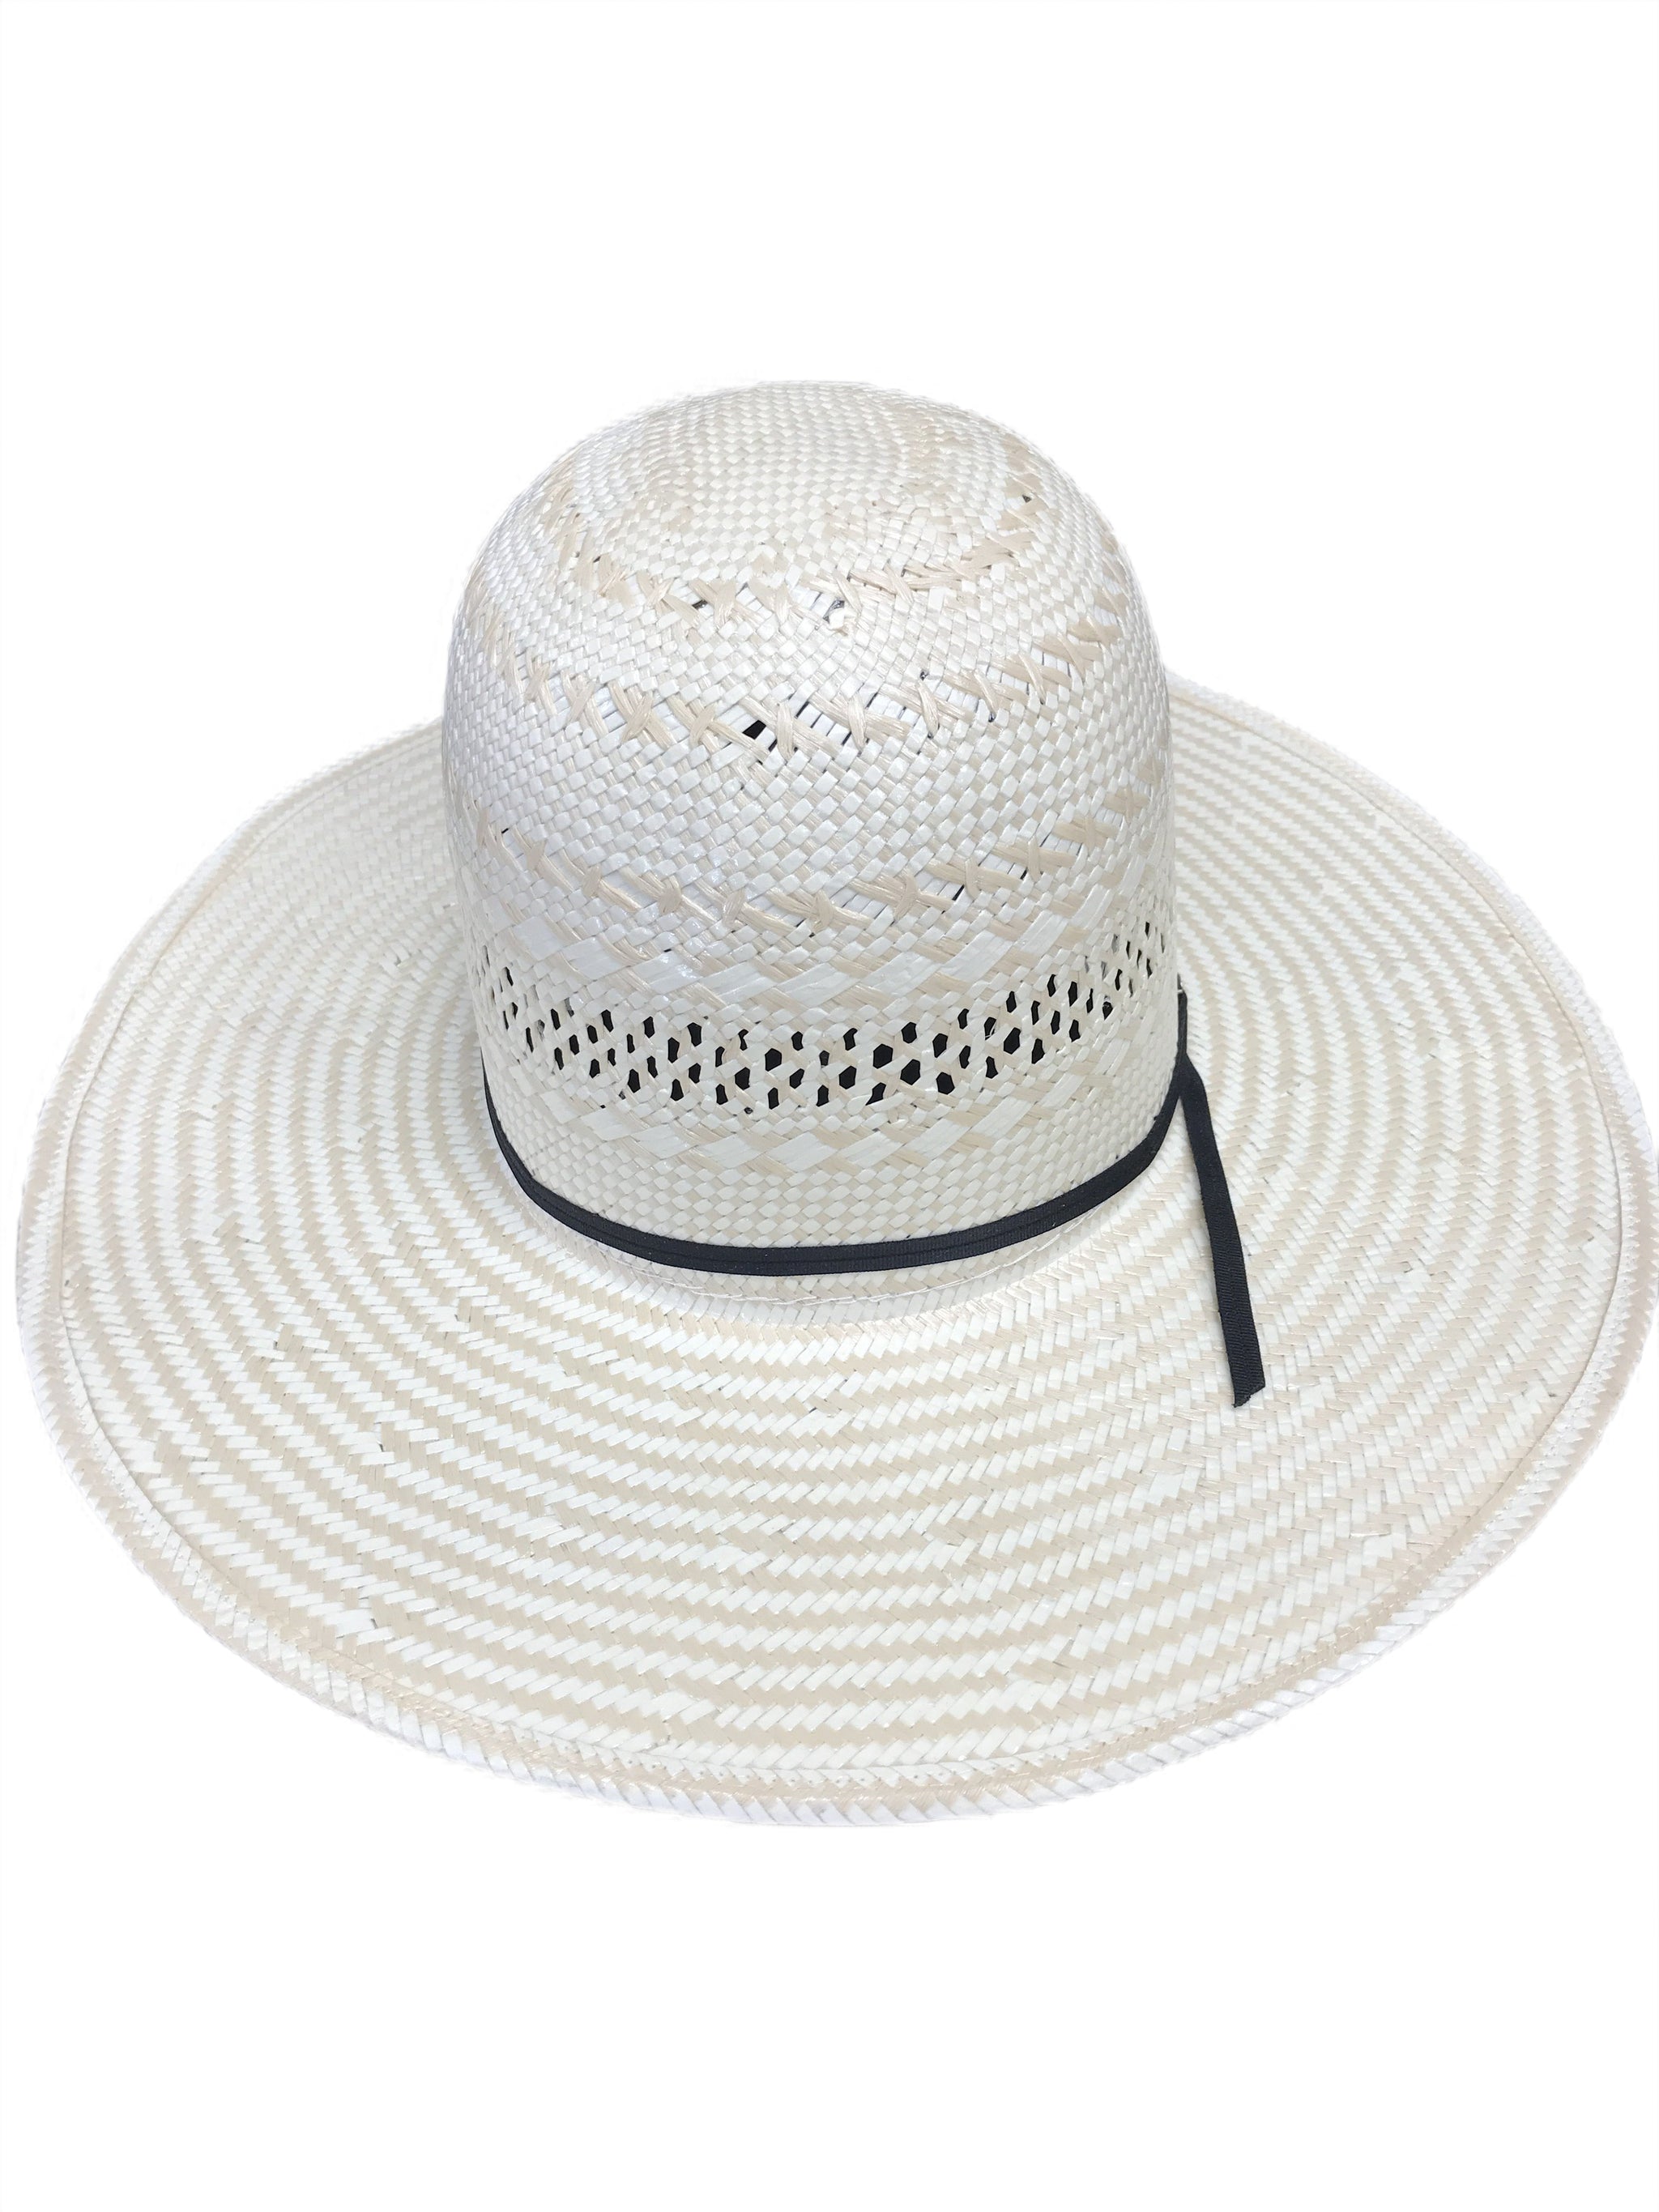 Omni | Womens Straw Sun Hat Fedora by American Hat Makers